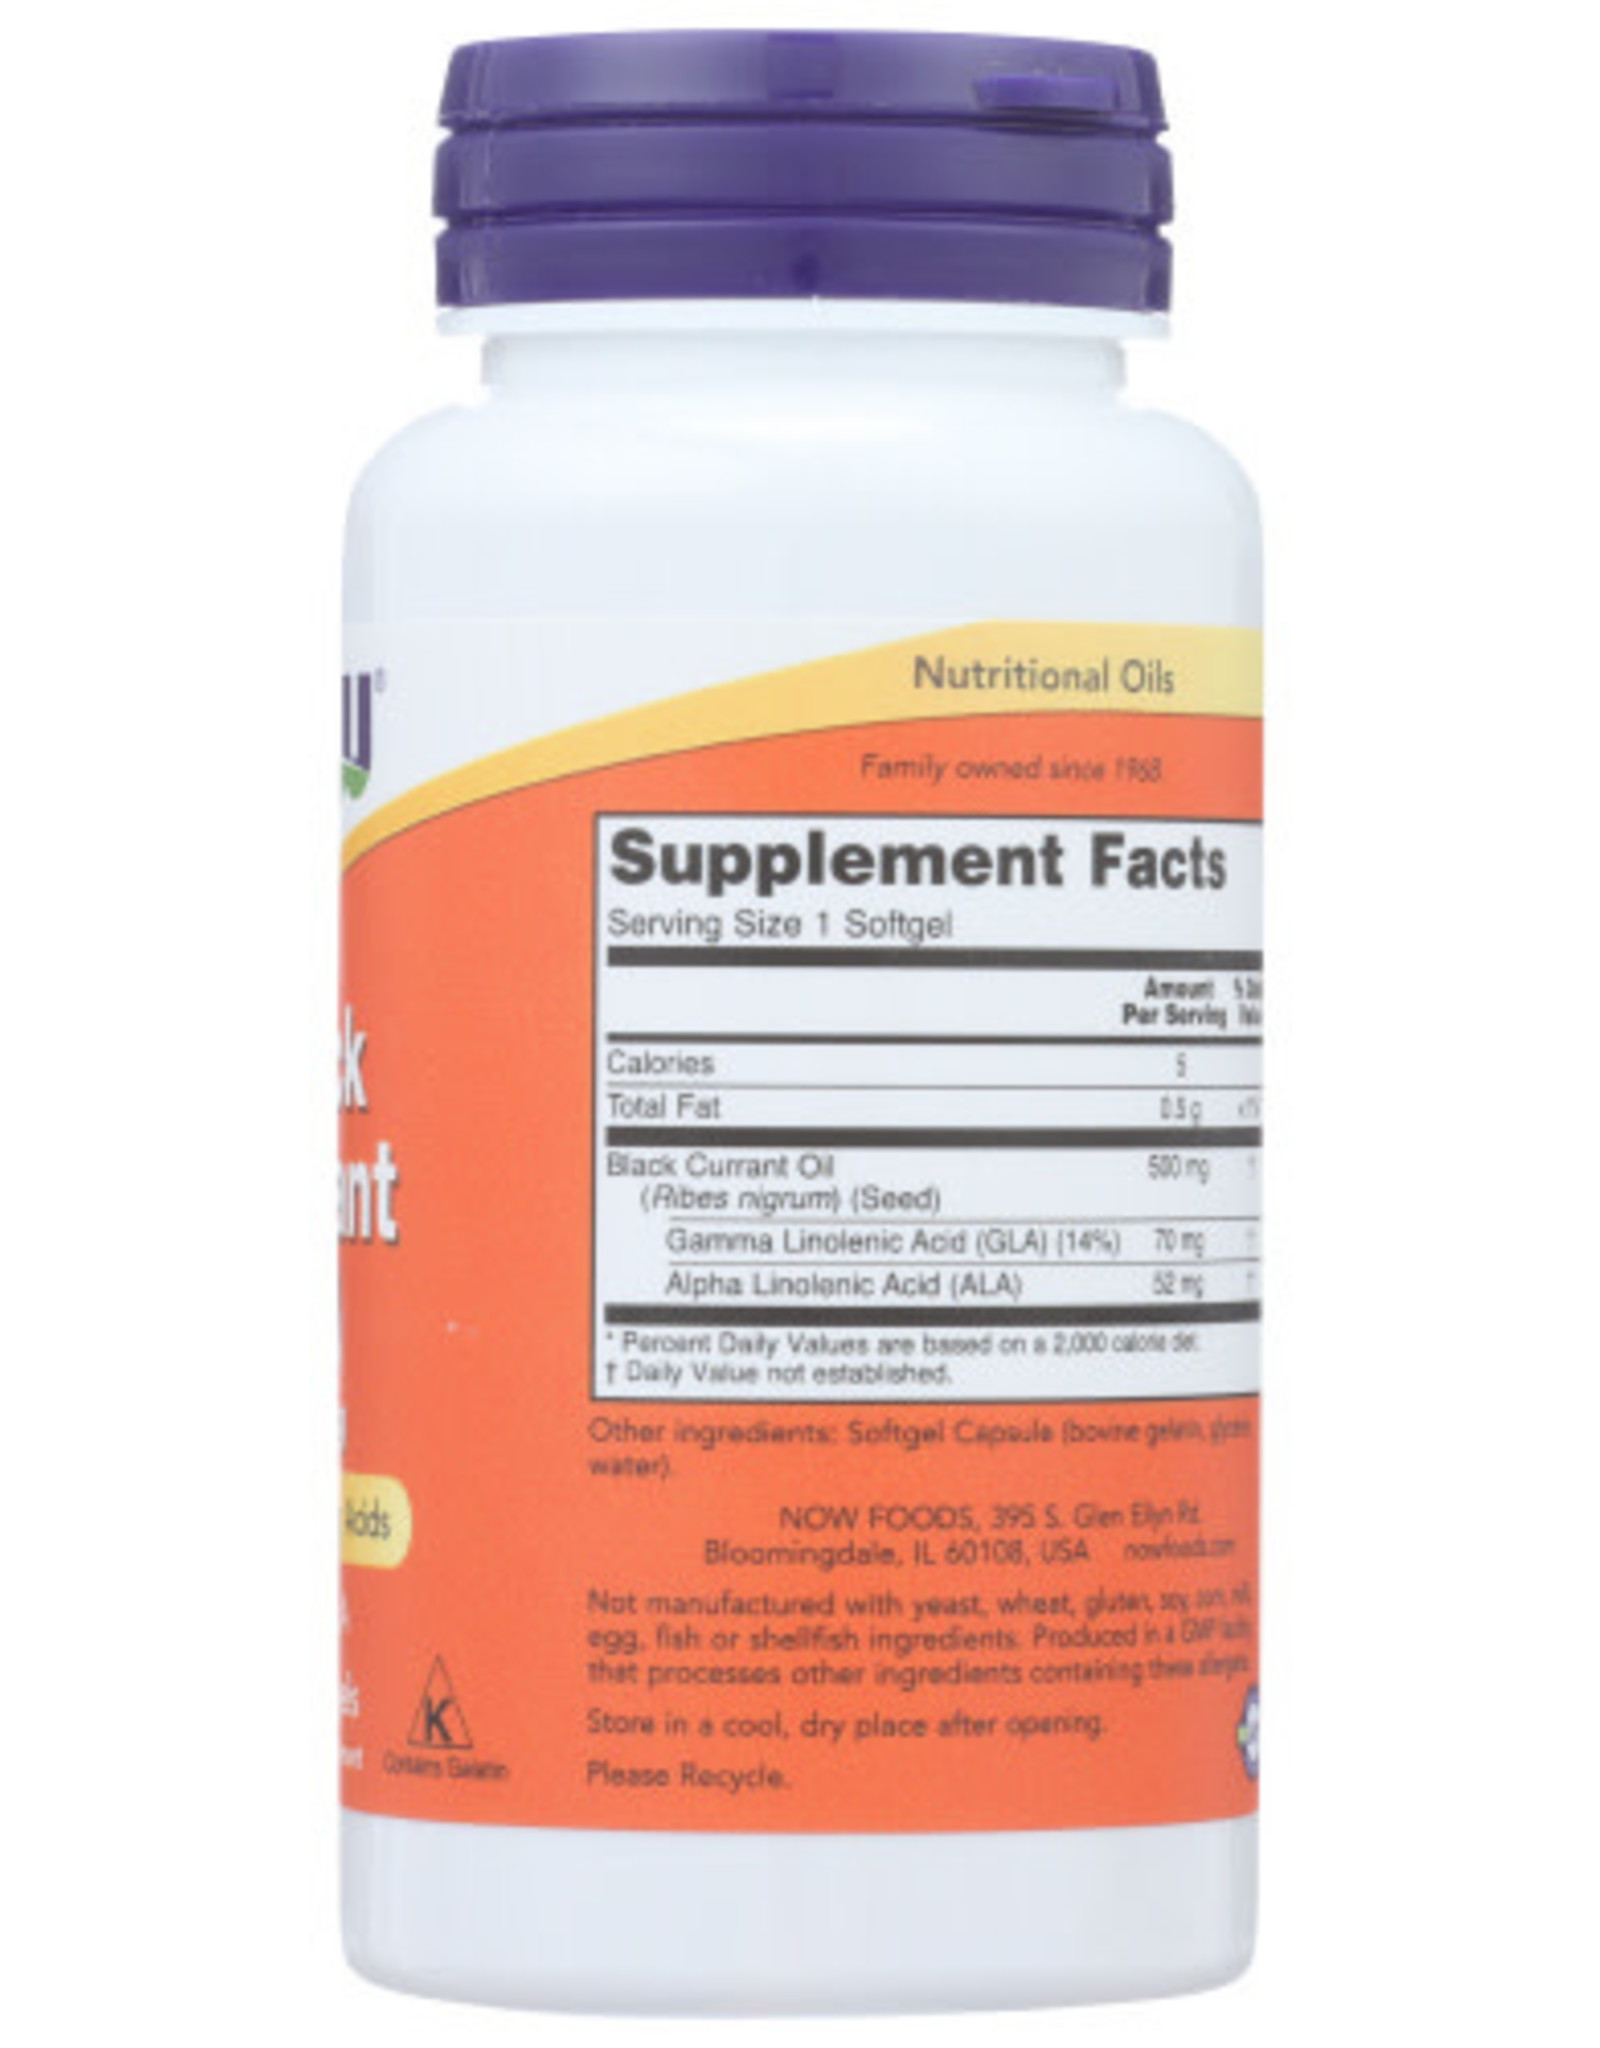 NOW FOODS NOW FOODS BLACK CURRANT OIL 500 MG, 100 SOFTGELS